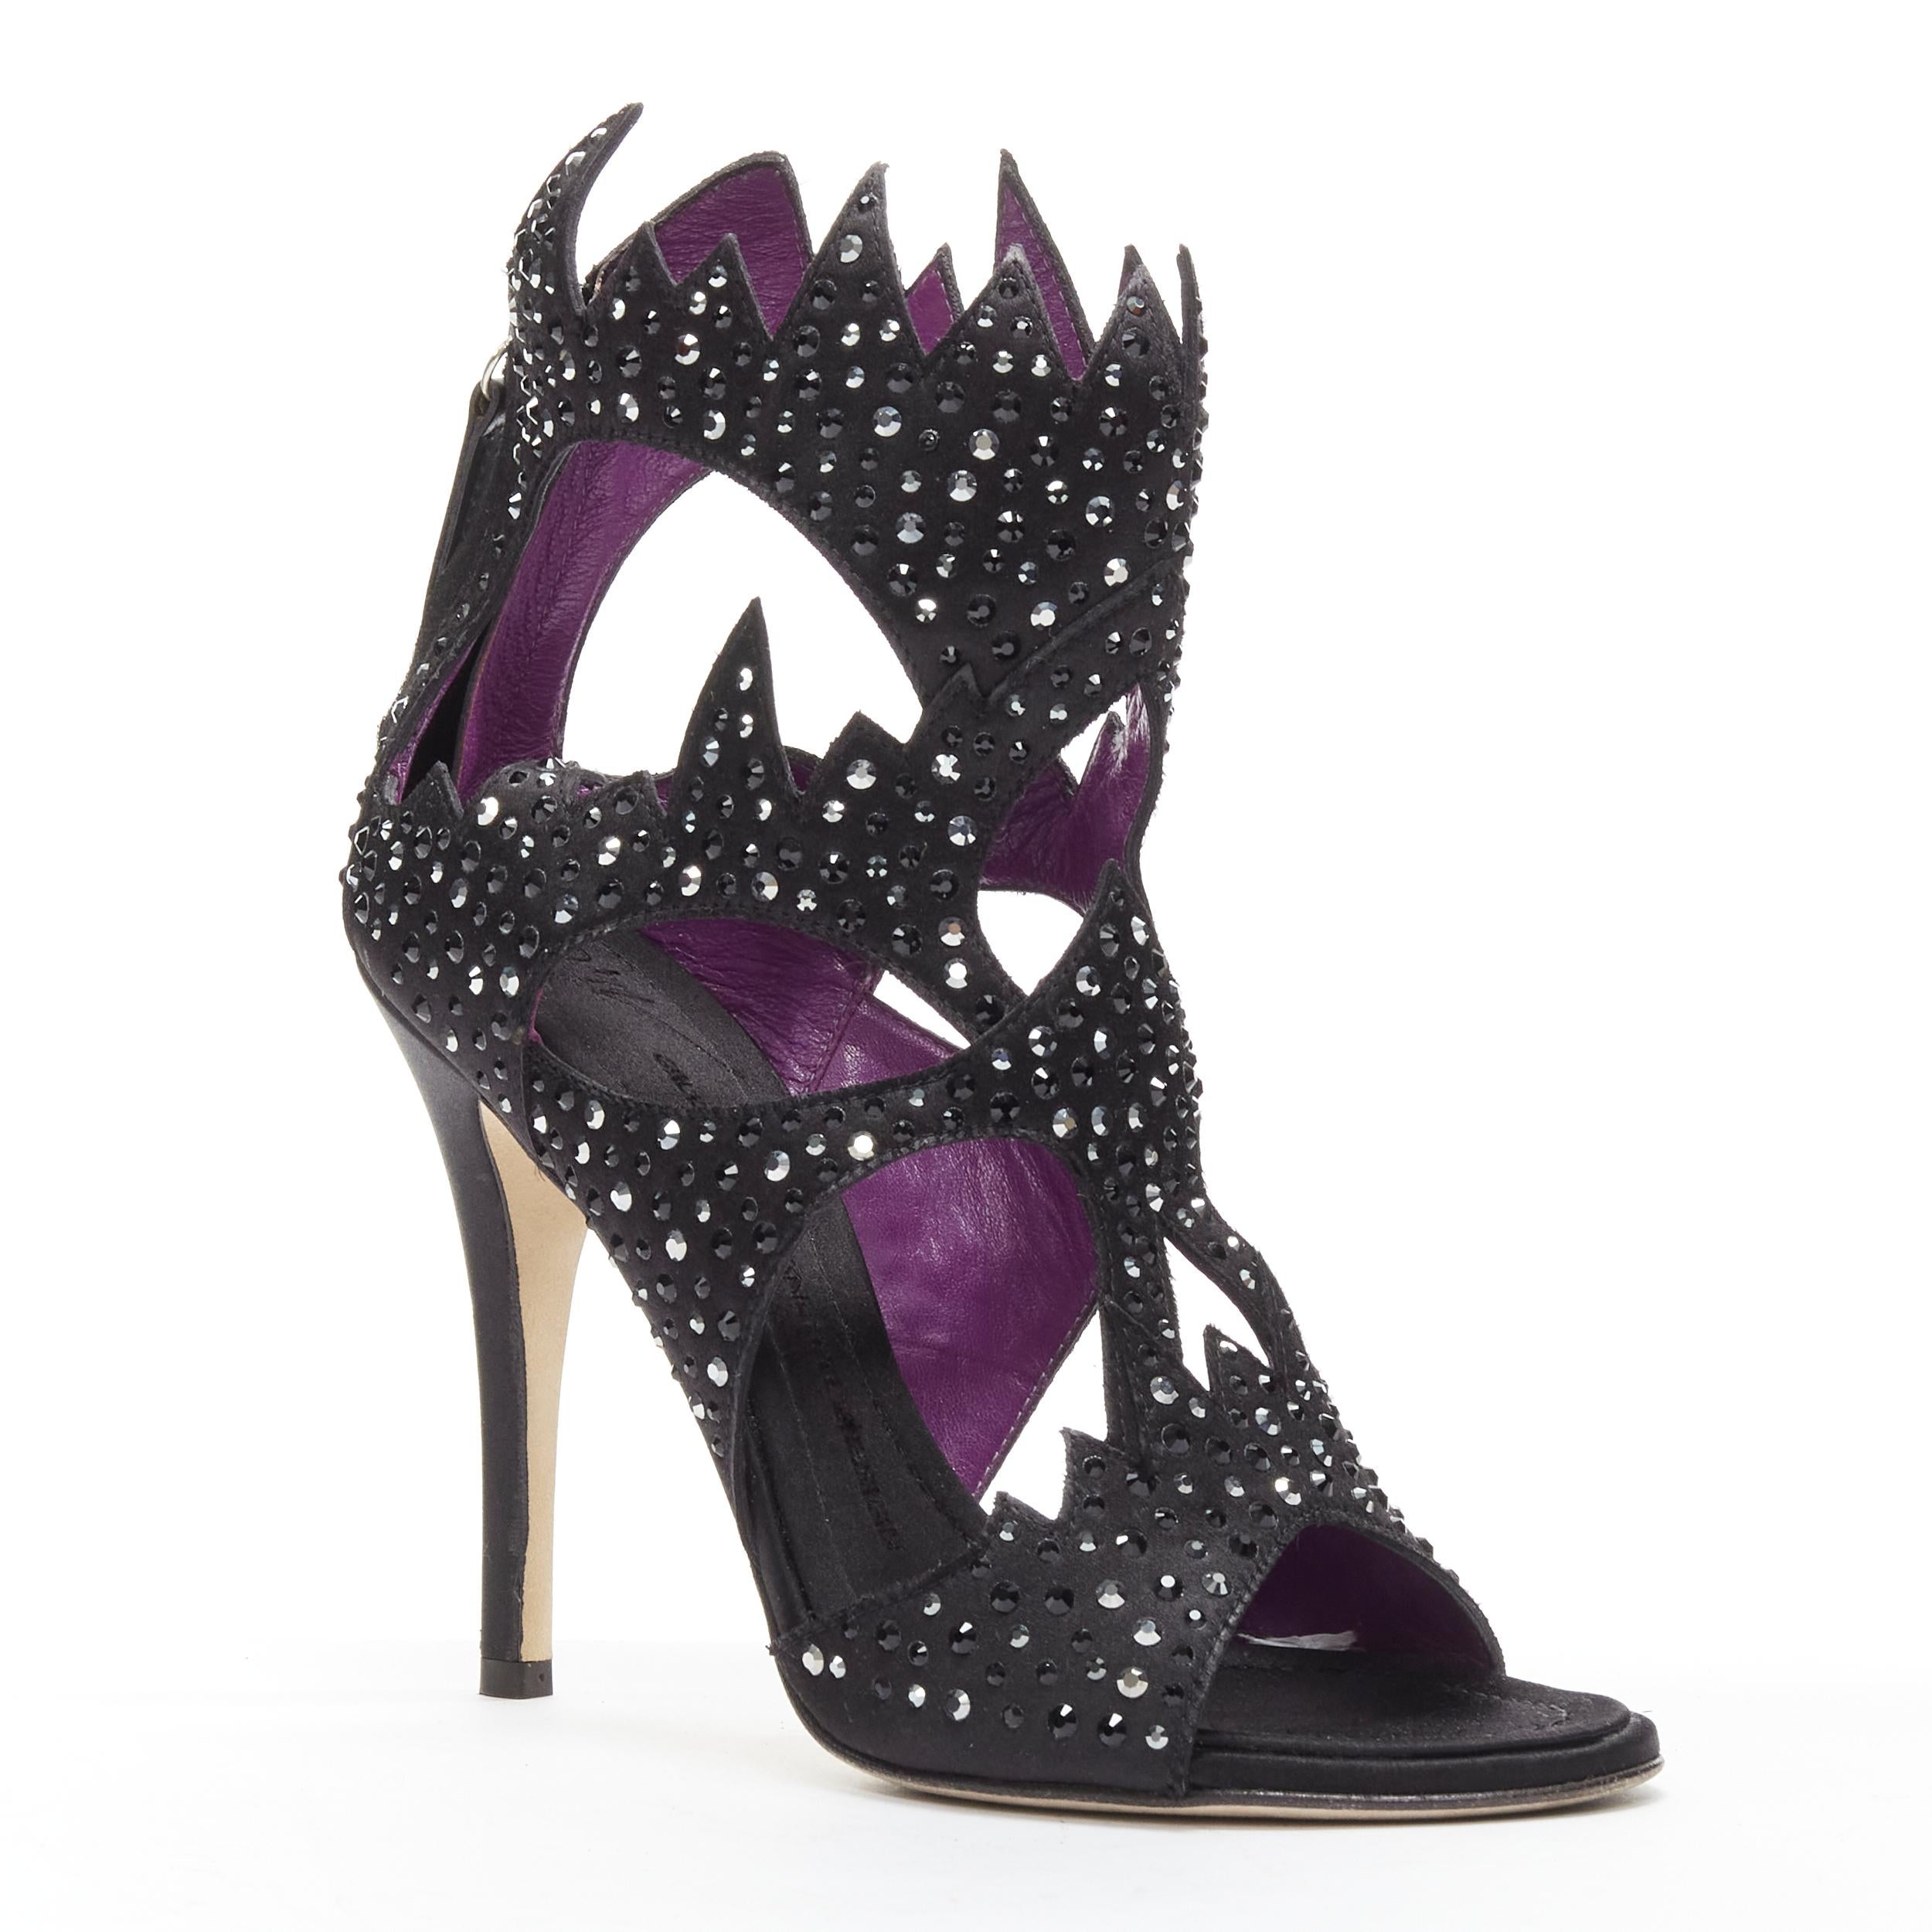 GIUSEPPE ZANOTTI black crystal embellished satin cutout sandals heels EU37.5
Reference: GIYG/A00266
Brand: Giuseppe Zanotti
Material: Satin
Color: Black, Purple
Pattern: Solid
Closure: Zip
Lining: Purple Leather
Made in: Italy

CONDITION:
Condition: